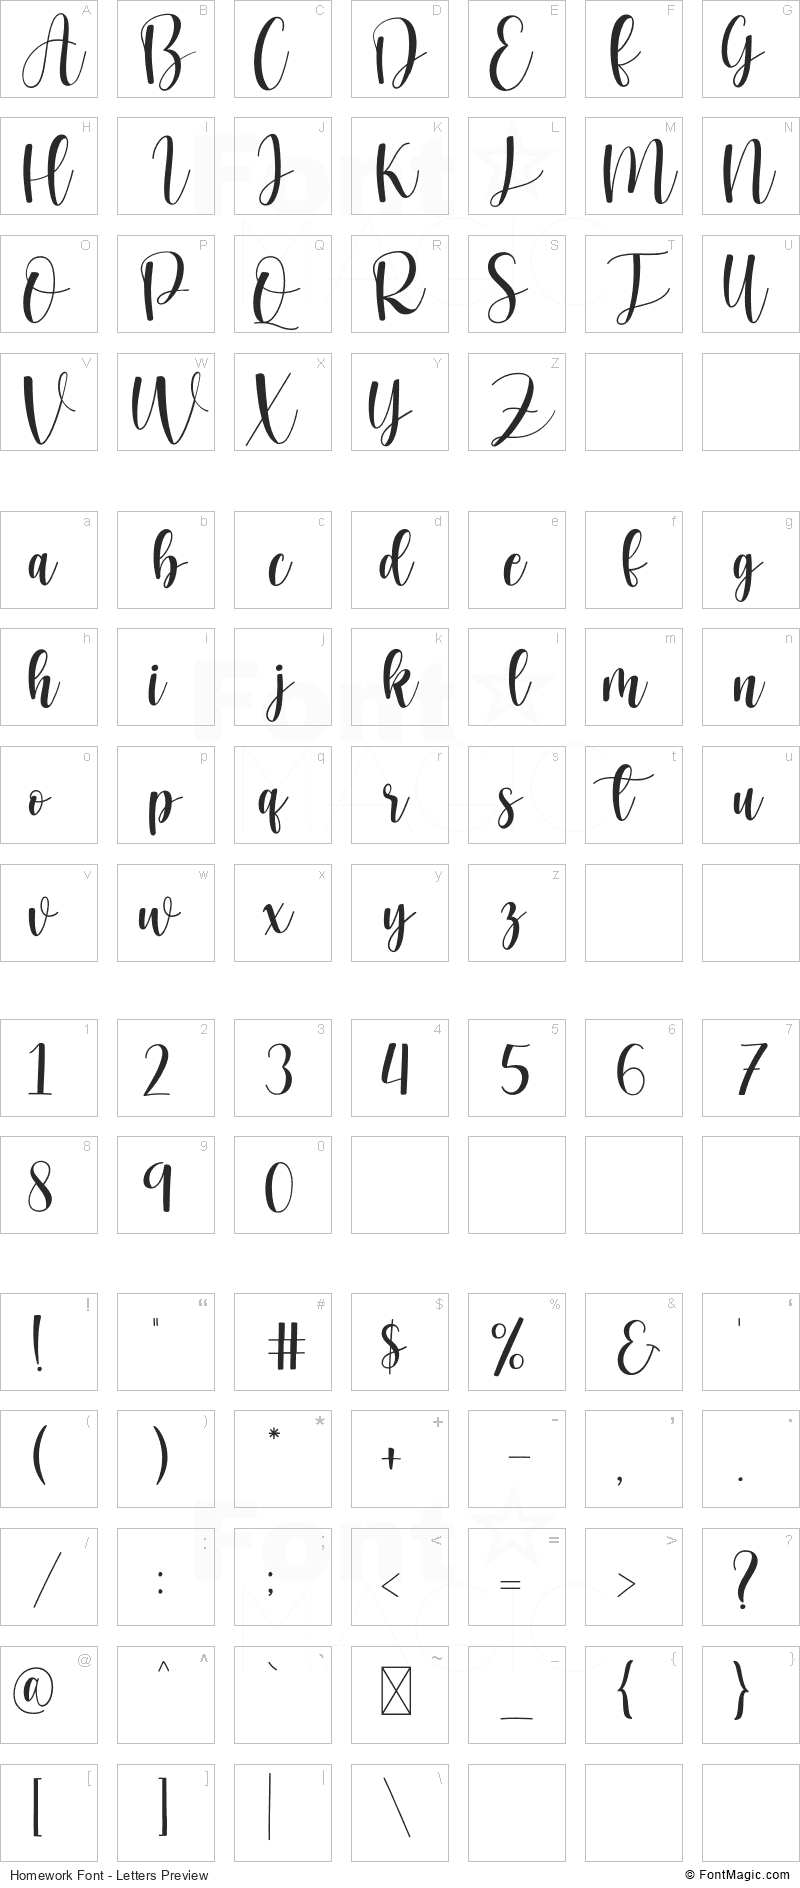 Homework Font - All Latters Preview Chart